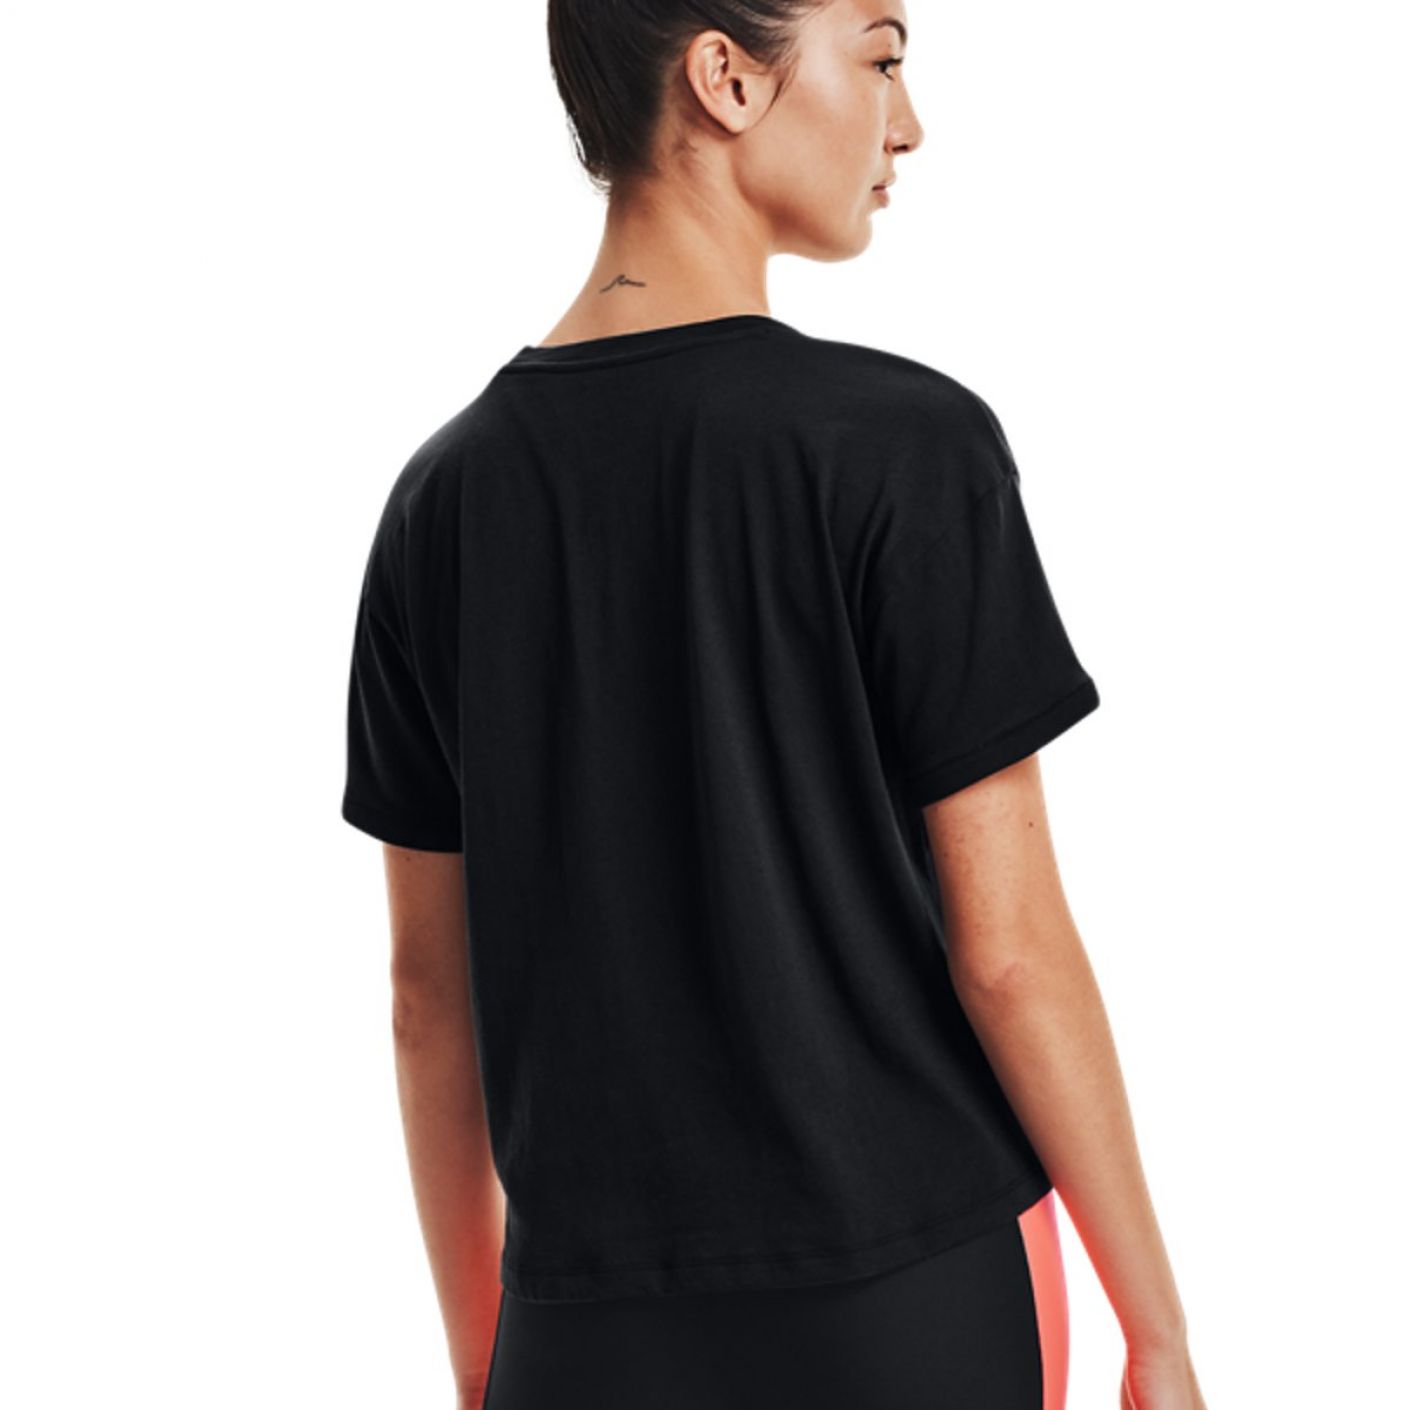 Under Armour Live Glow Graphic Tee Nera